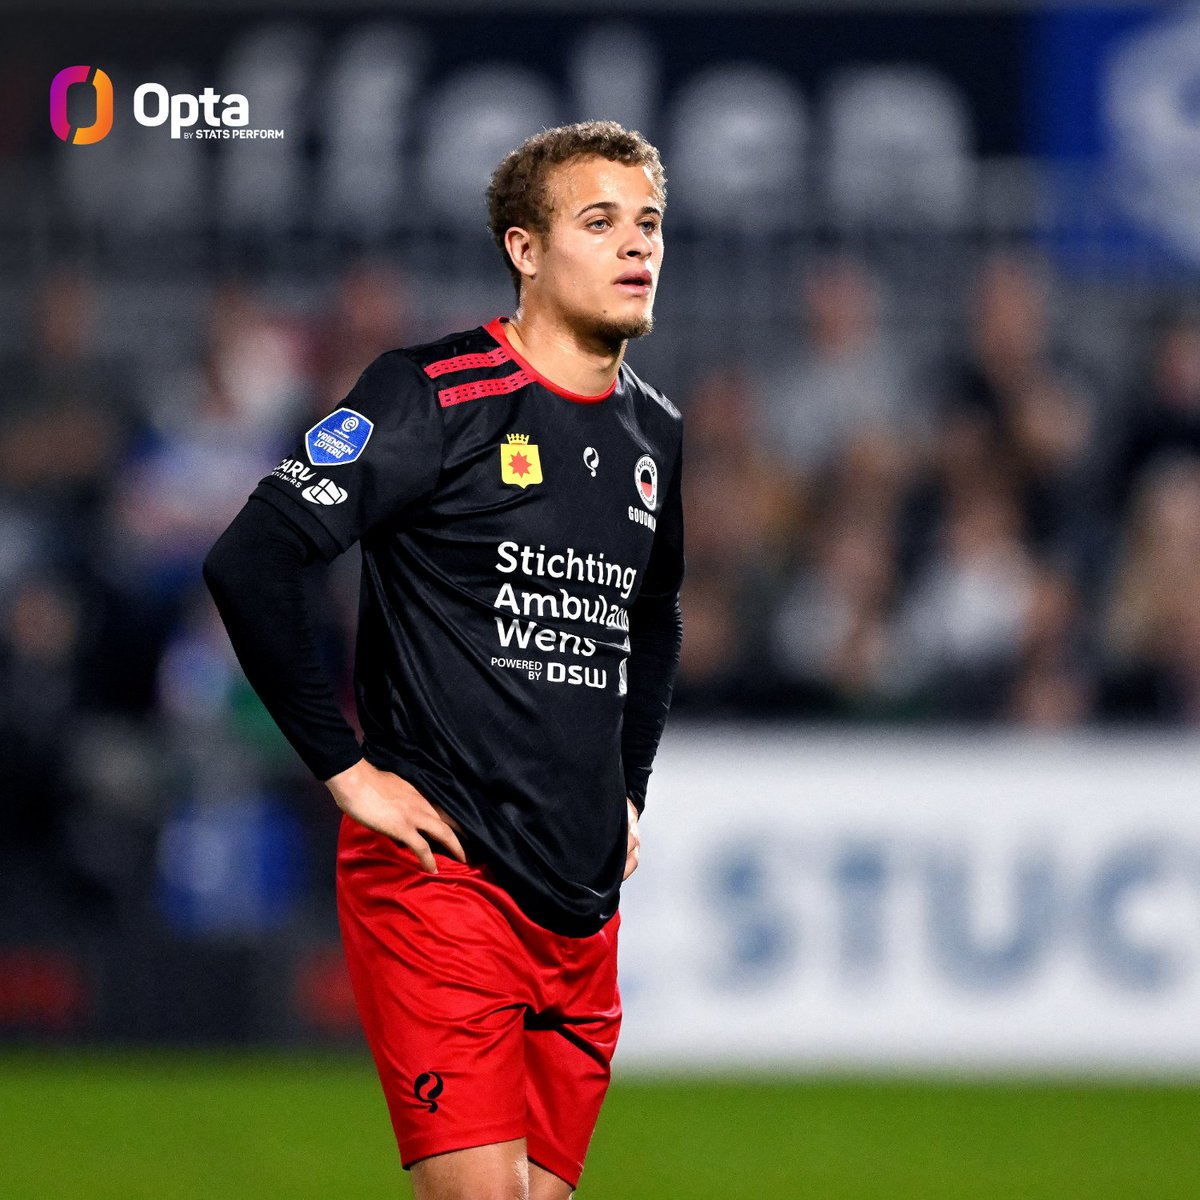 13 & 11 - Kenzo Goudmijn is the first @excelsiorrdam player on record (since 2010-11) with 13 dribbles and 11 ball recoveries in a single @eredivisie game. Goldmine.